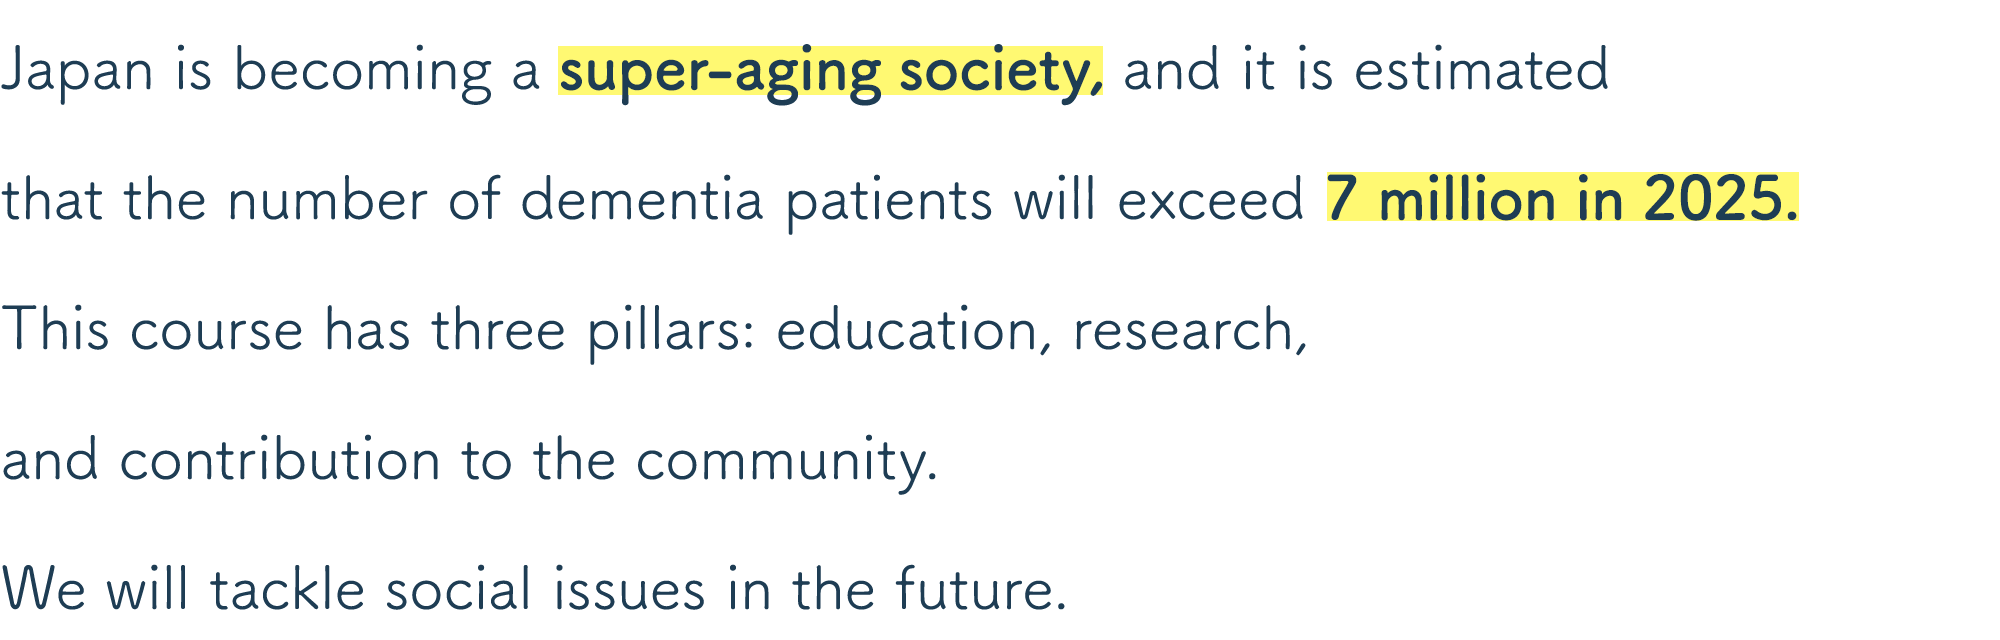 Japan is becoming a super-aging society, and it is estimated that the number of dementia patients will exceed 7 million in 2025.This course has three pillars: education, research,and contribution to the community.We will tackle social issues in the future.